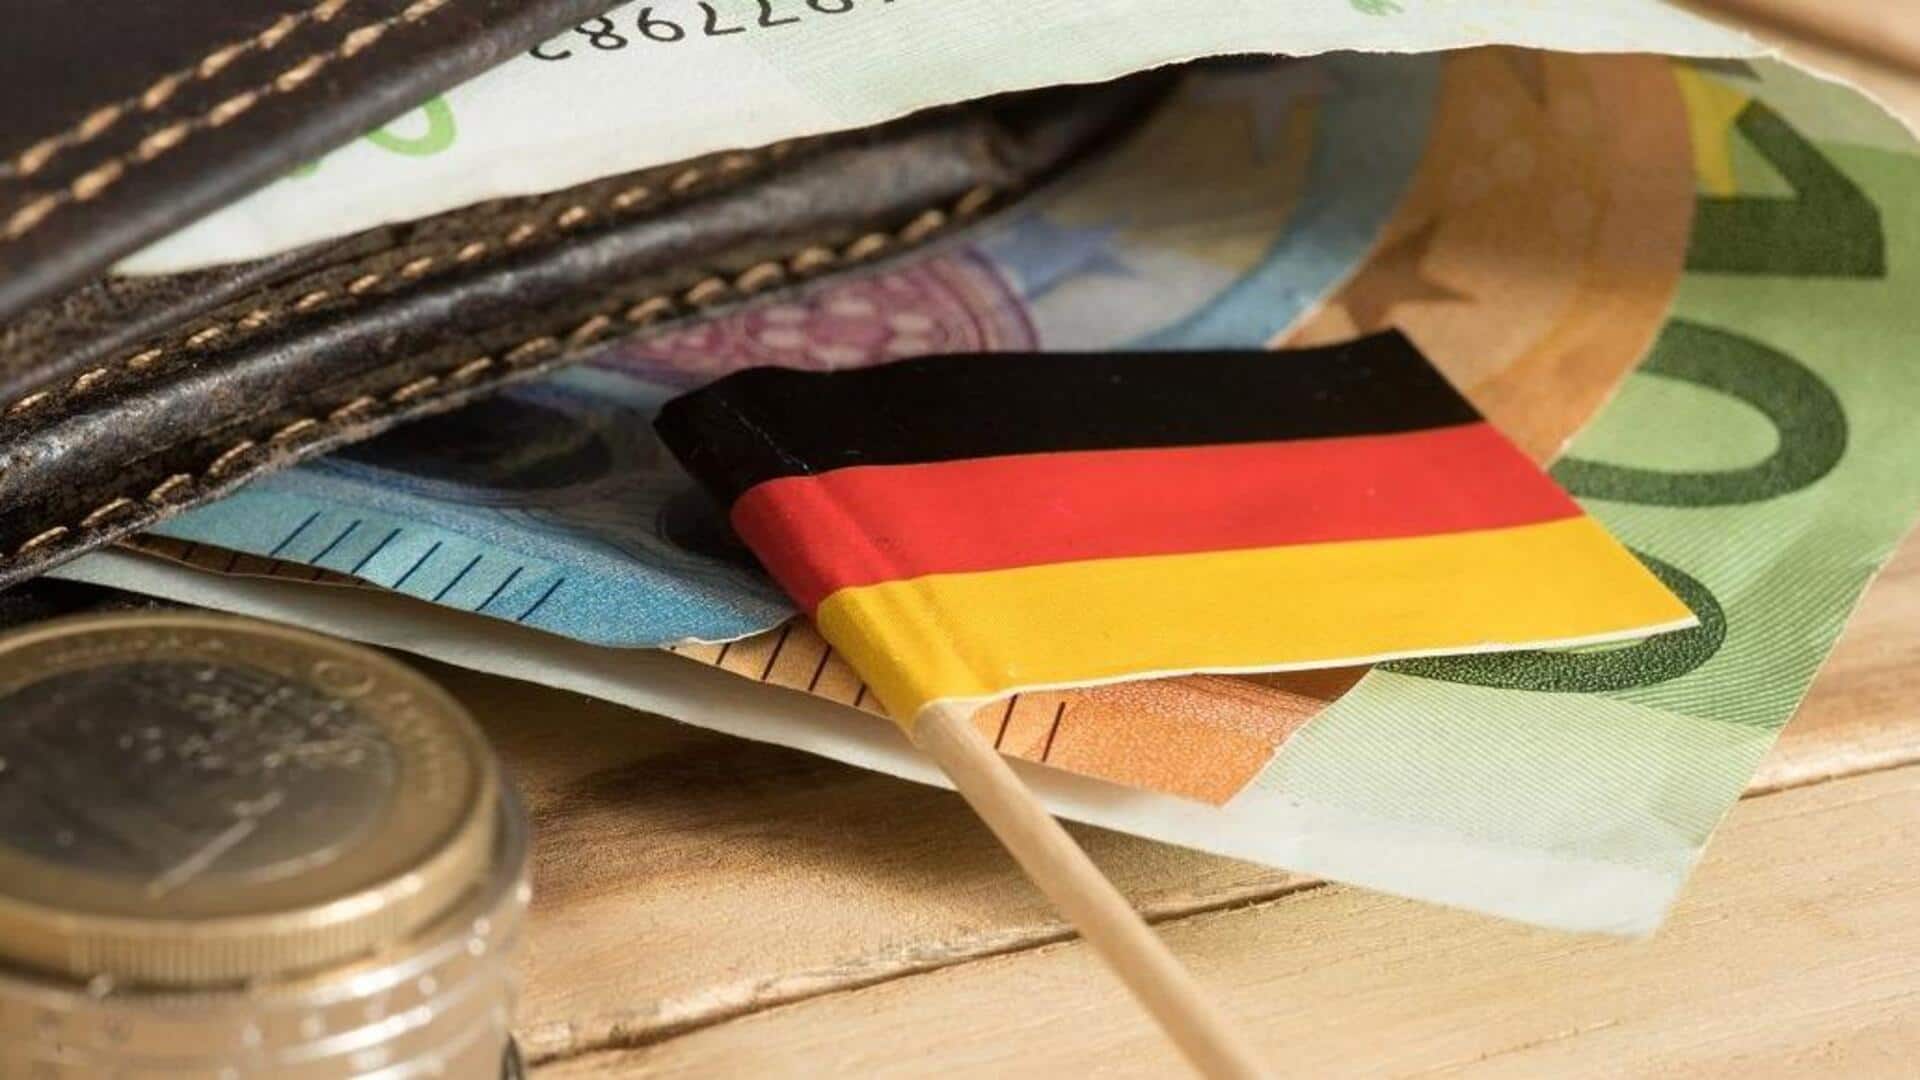 Germany's economy shrinks in Q3, stirs recession concerns